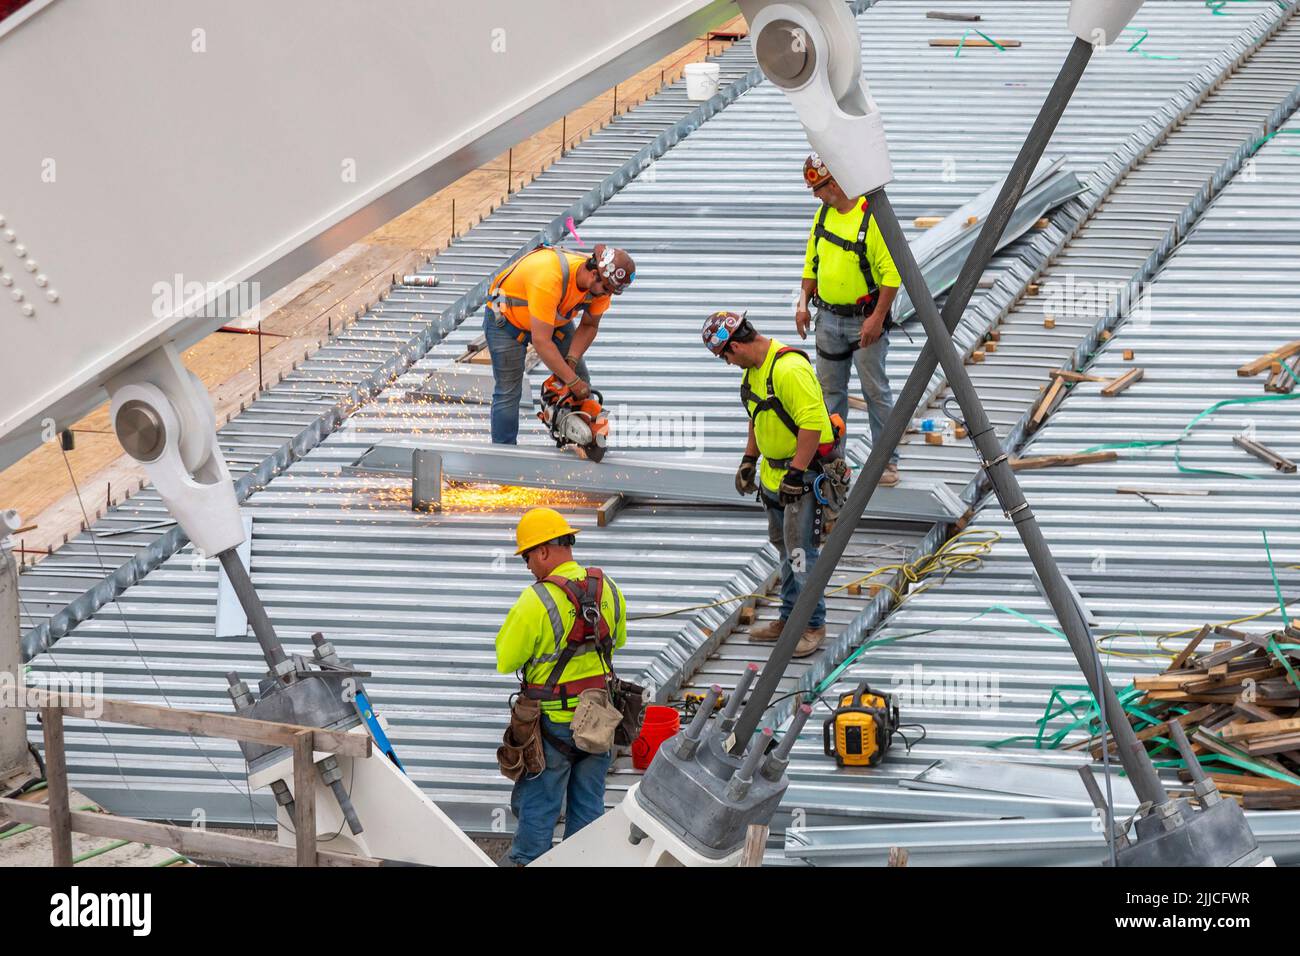 Detroit, Michigan - Workers construct the bridge deck on the new Second Avenue bridge over Interstate 94. The 5,000,000-pound structure is a network t Stock Photo